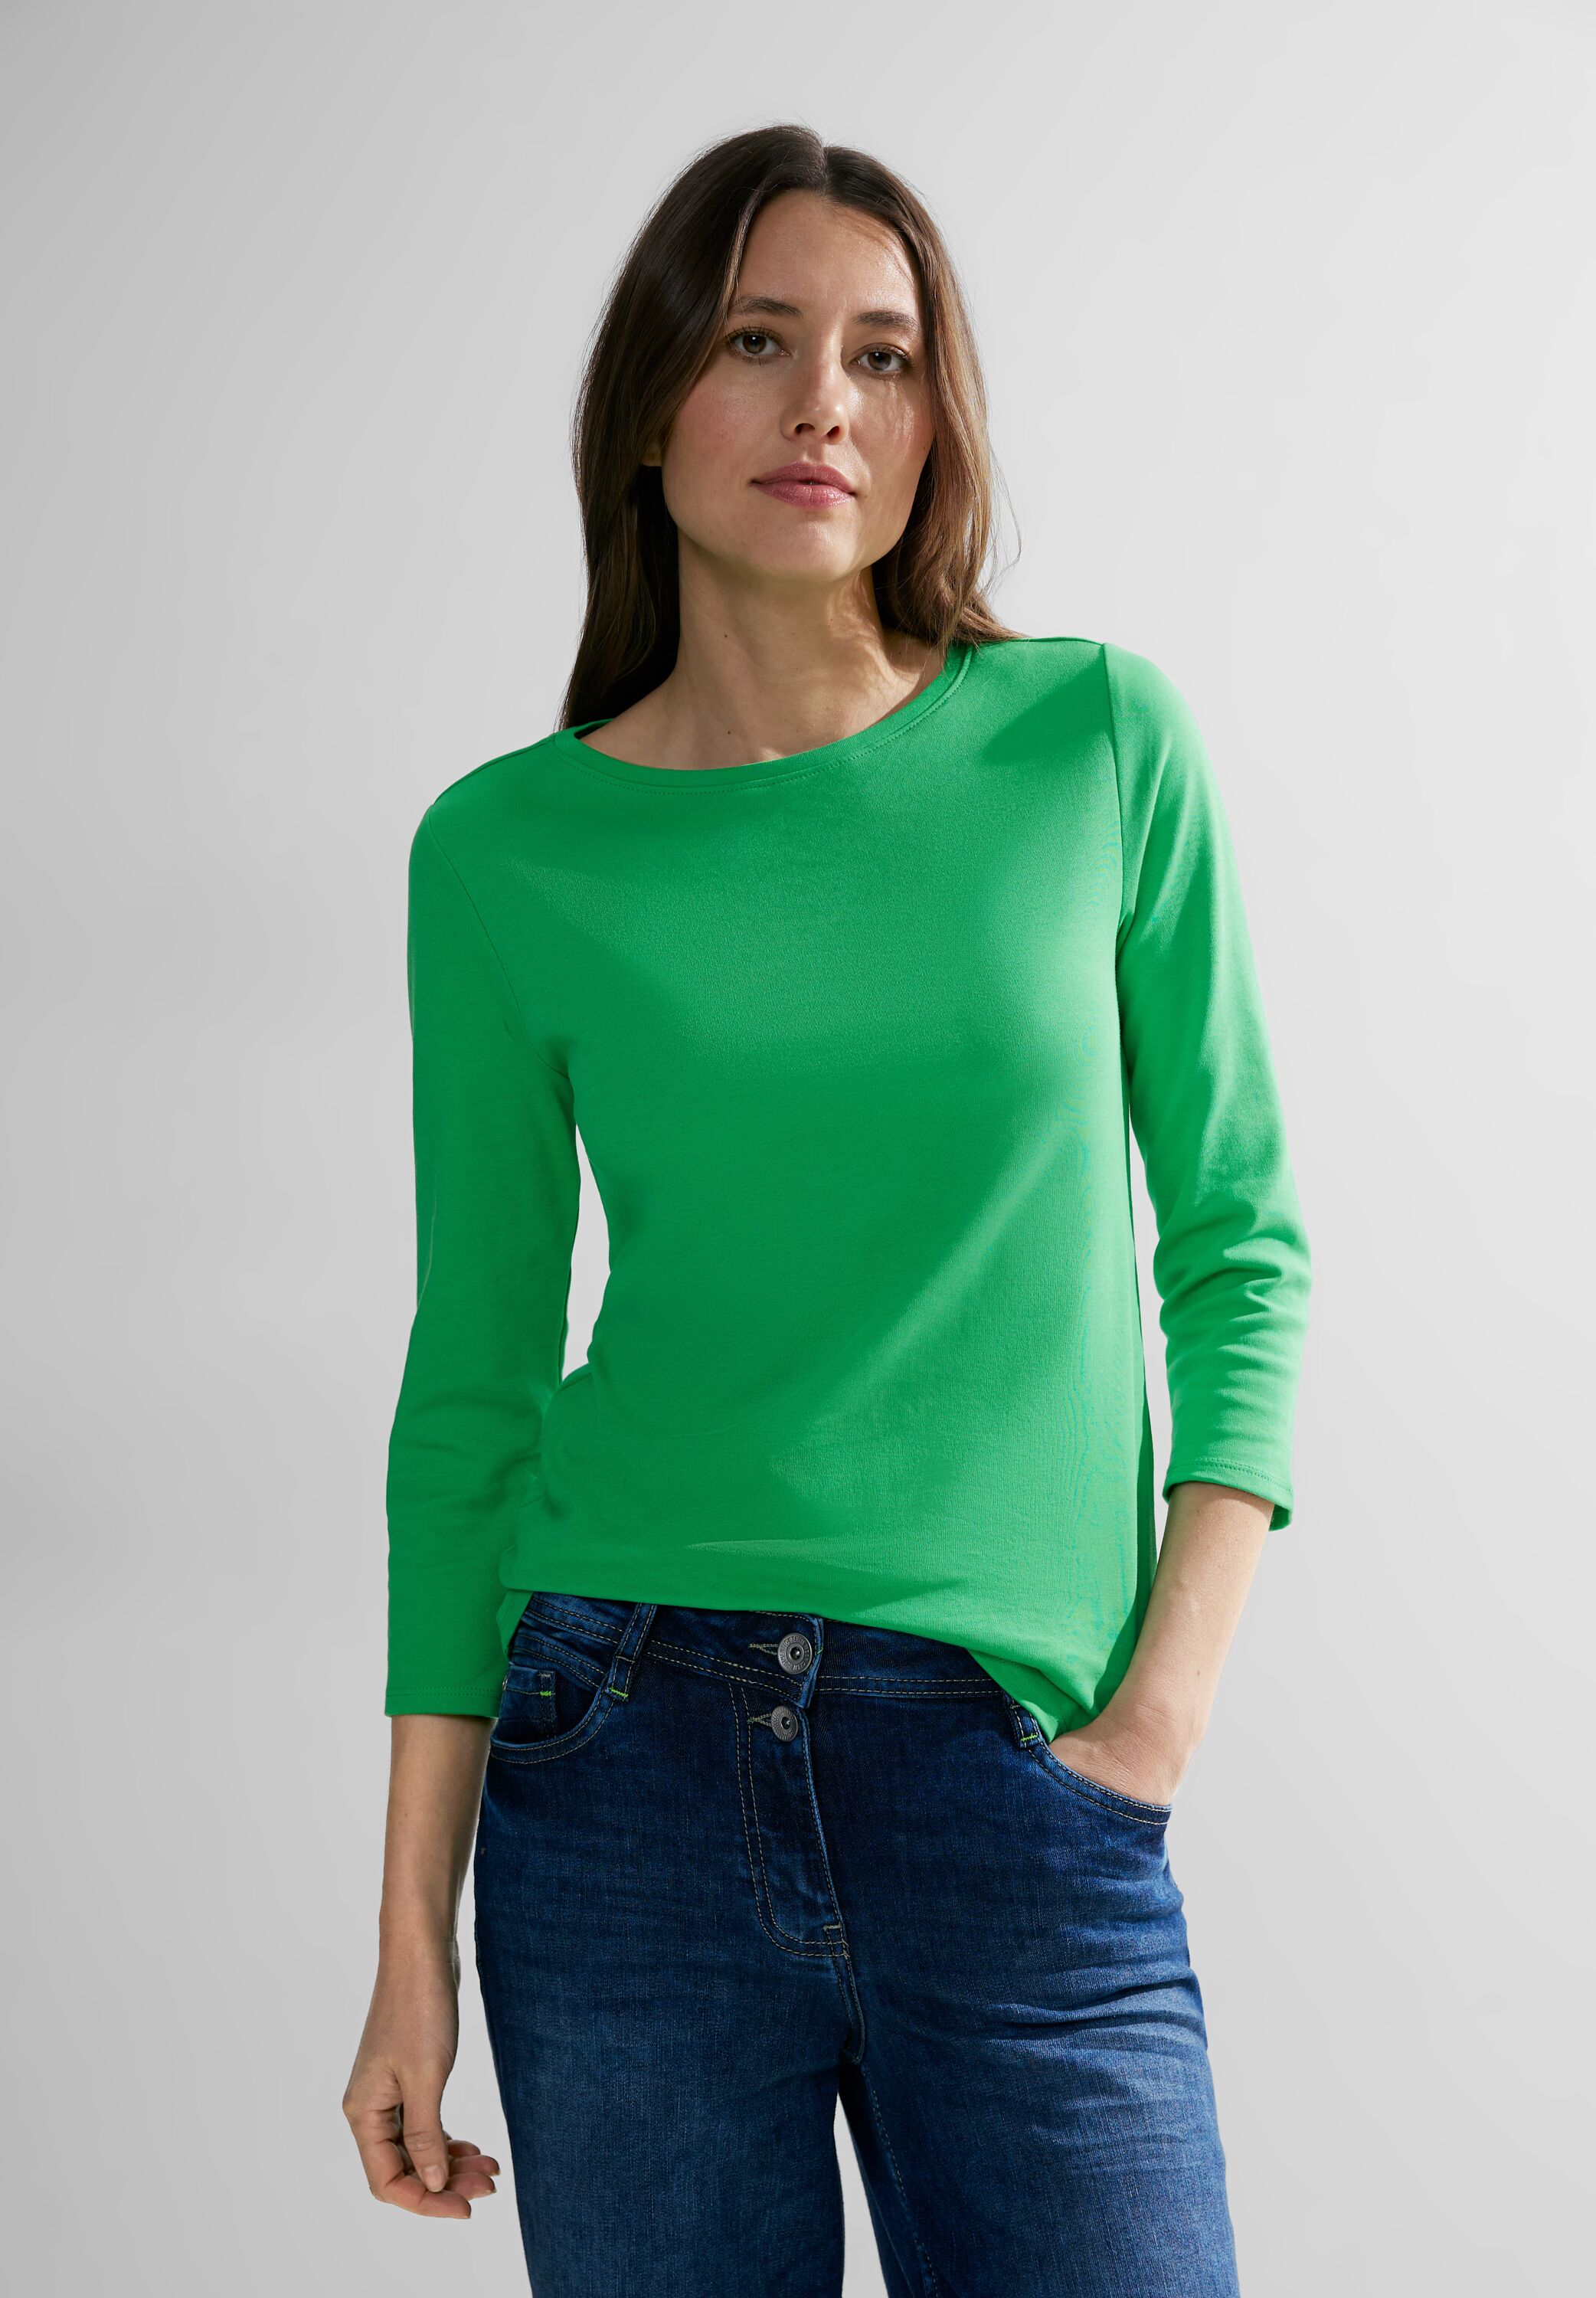 CECIL Shirt in Celery Green B317389-15455 - CONCEPT Mode | T-Shirts